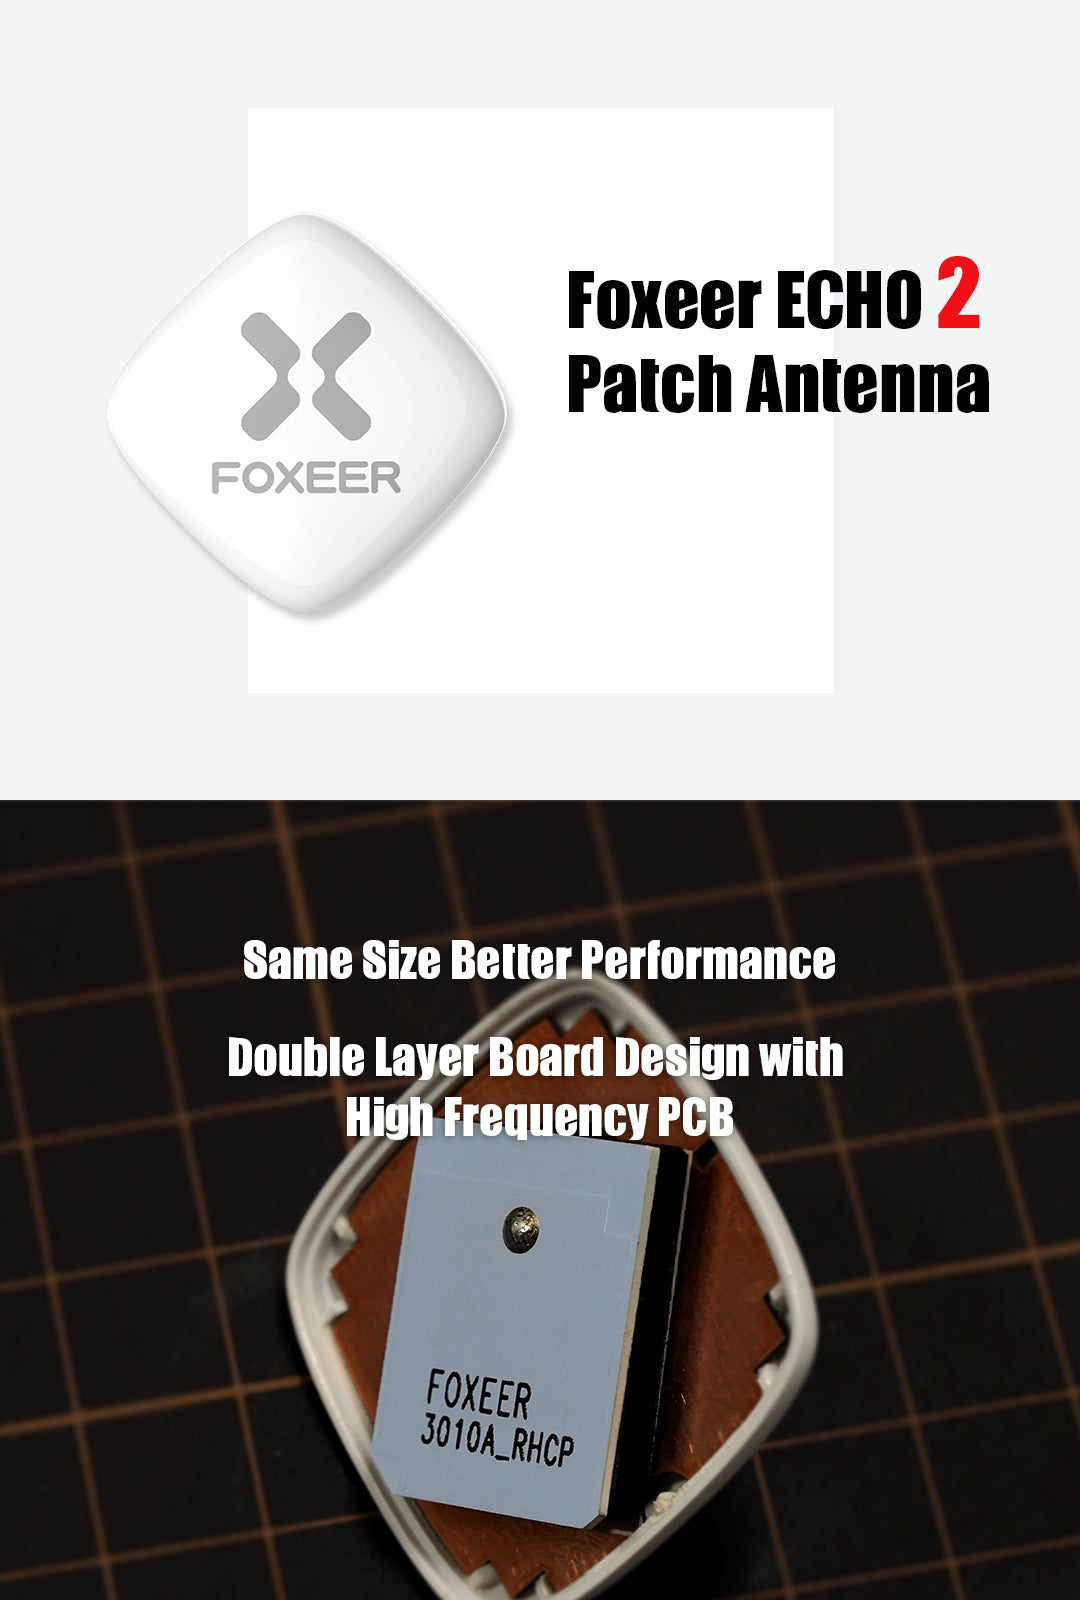 Foxeer Echo 2 Patch Antenna